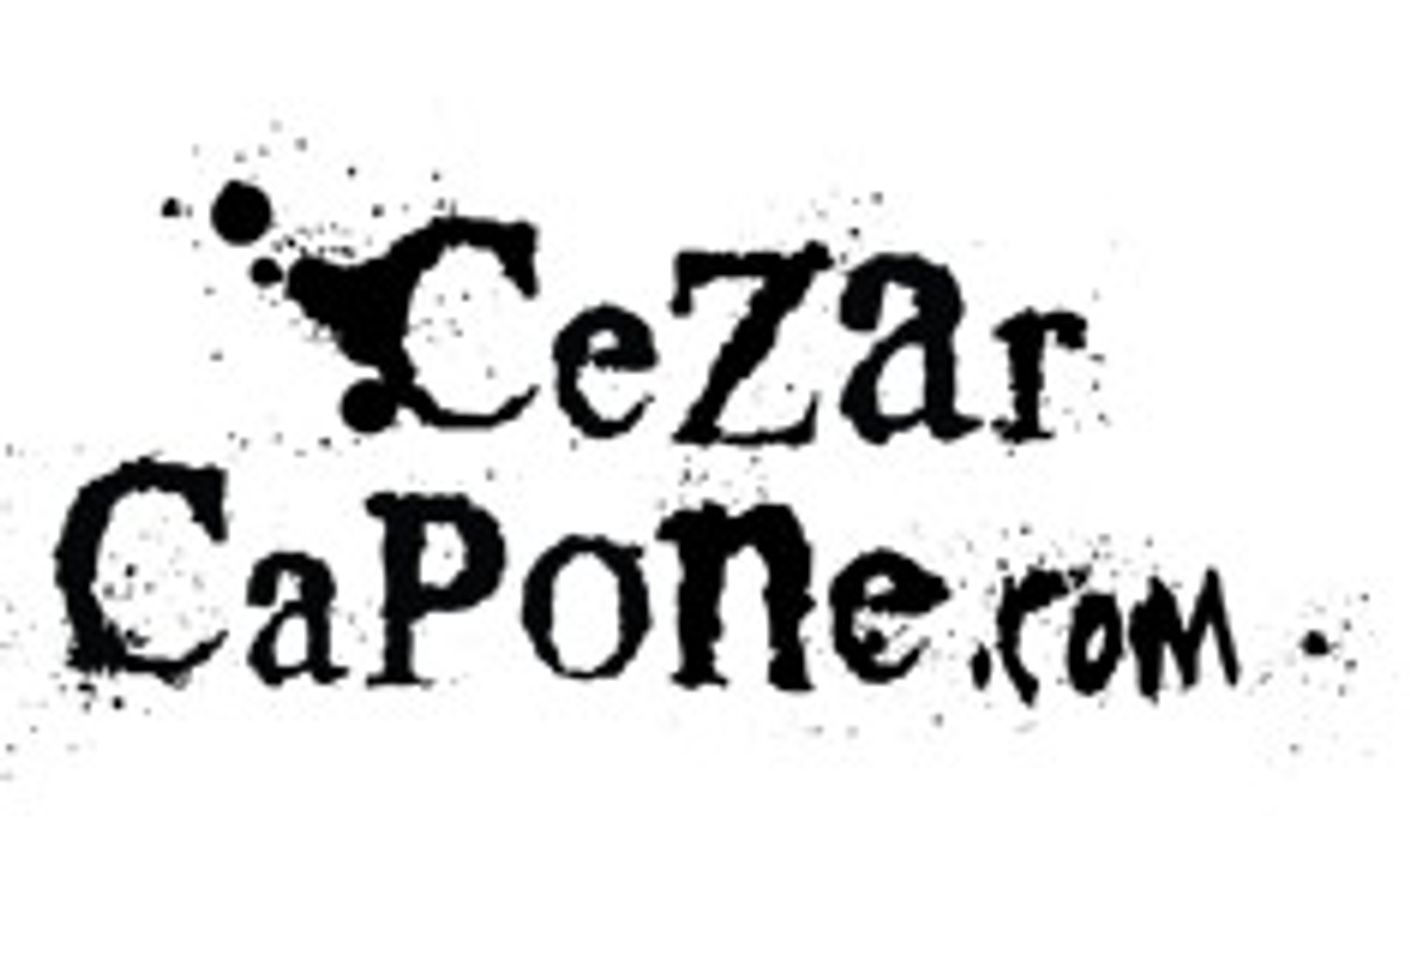 Cezar Capone Likes Them '18 With Proof'